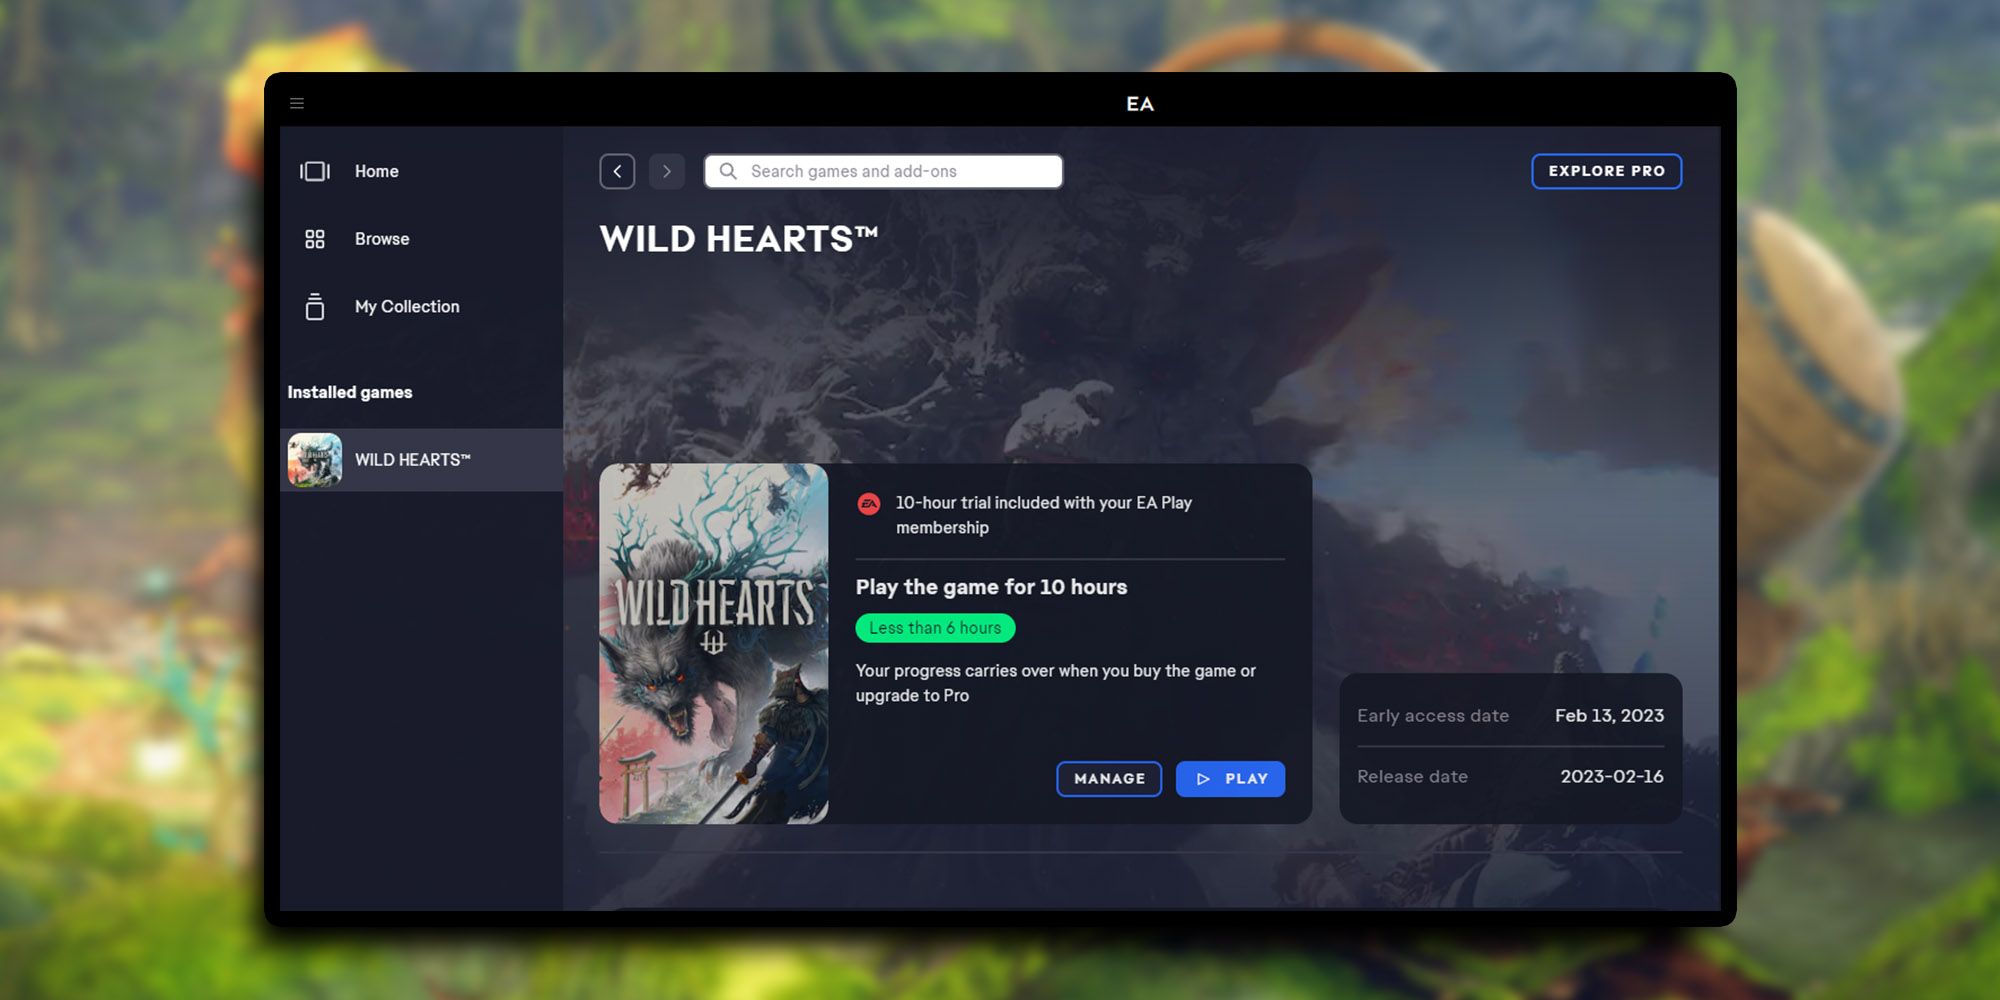 Wild Hearts - Launcher from the first version as it appears in the EA app